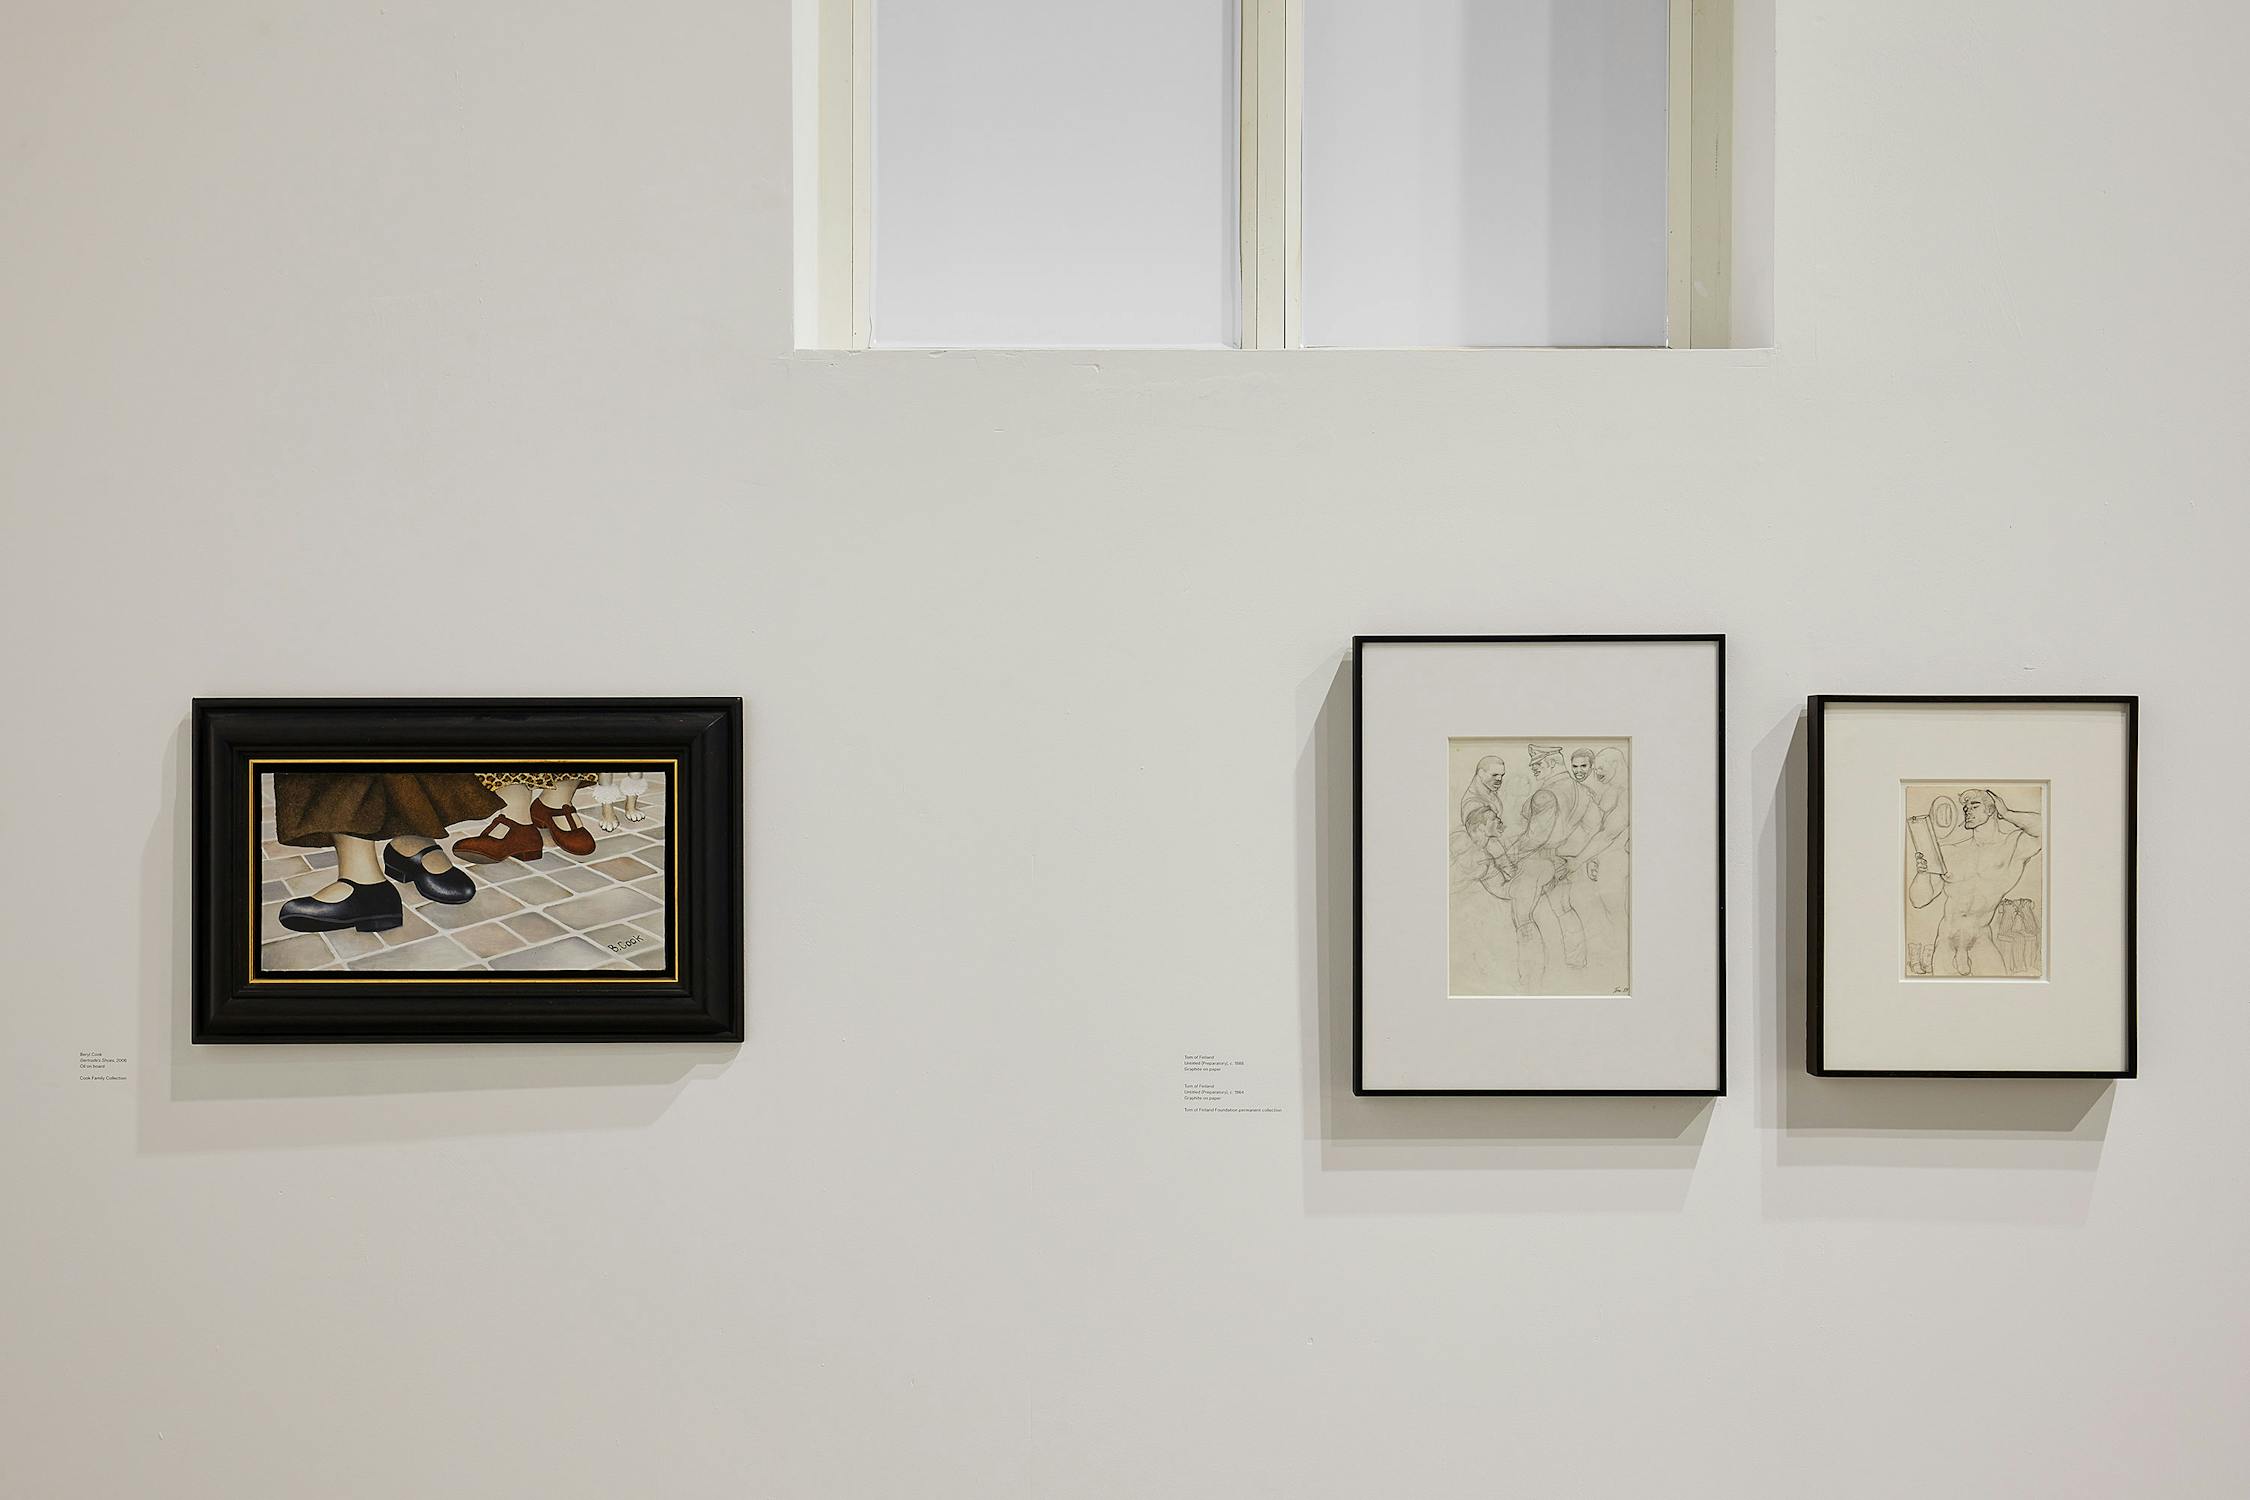 a painting of women's shoes by beryl cook hung beside two framed preliminary sketches of men engaged in sexual acts by Tom of Finland